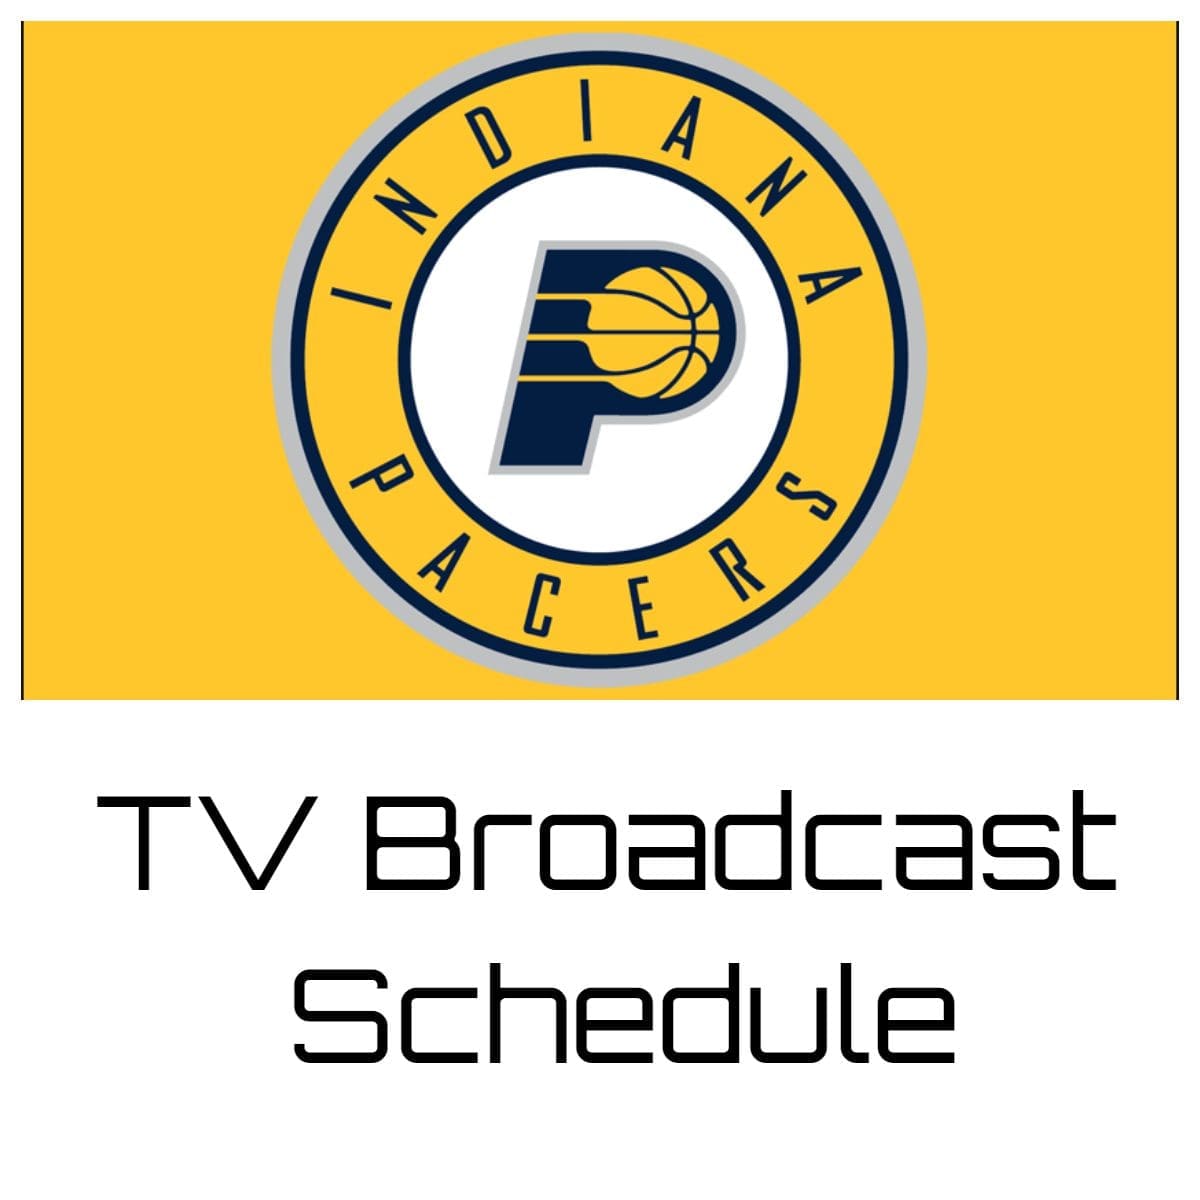 Indiana Pacers TV Broadcast Schedule